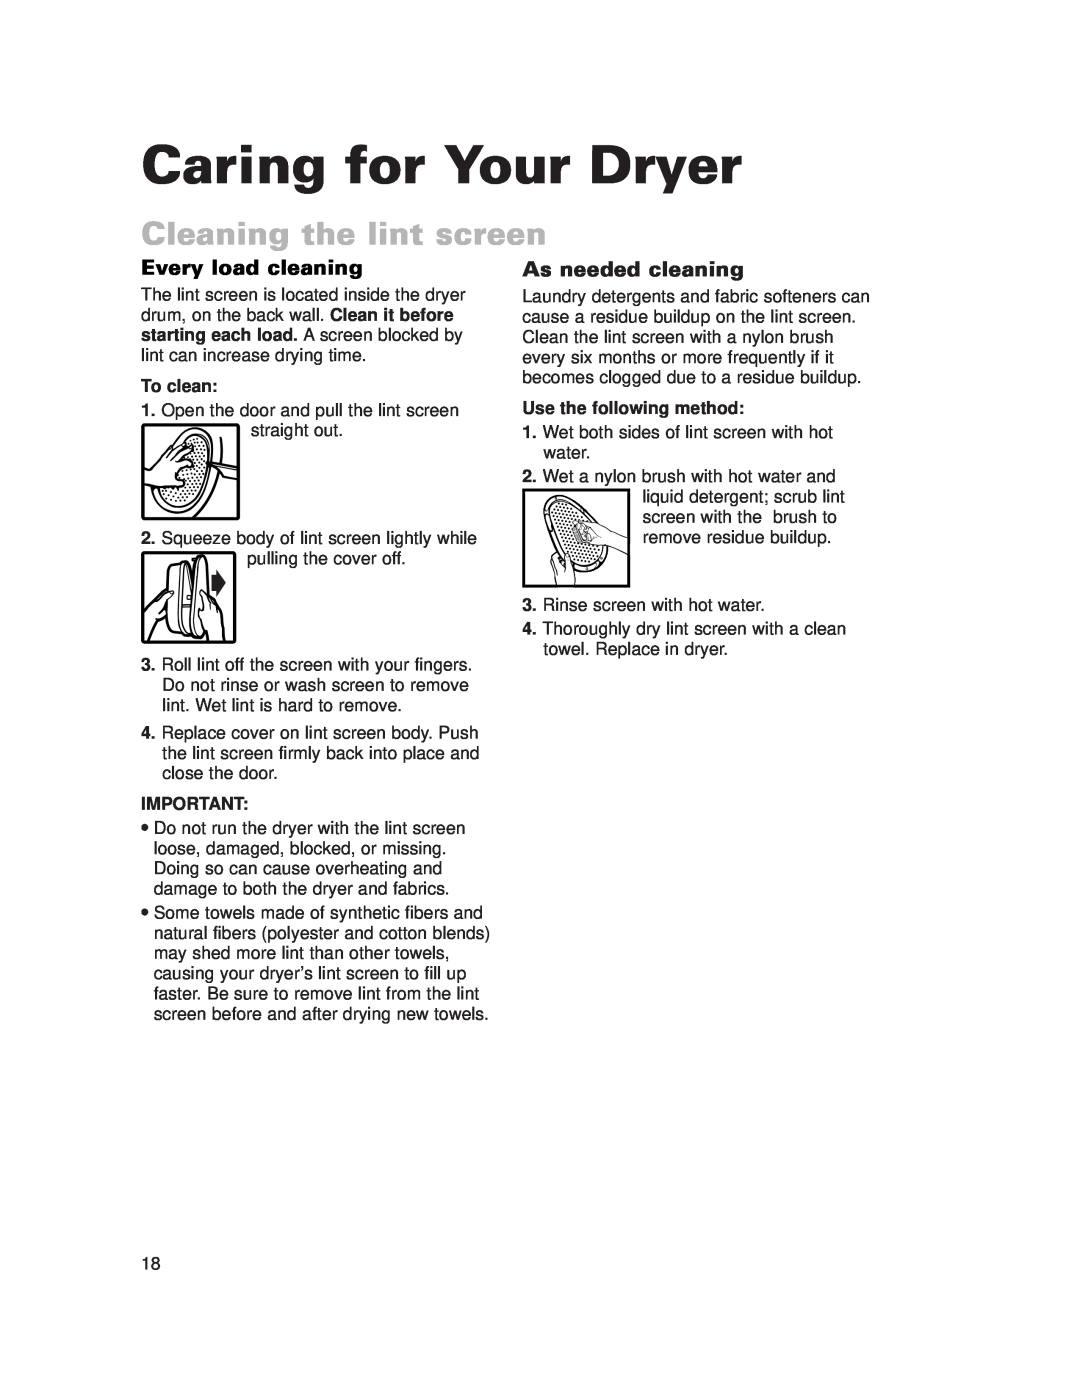 Whirlpool 3977631 Caring for Your Dryer, Cleaning the lint screen, Every load cleaning, As needed cleaning, To clean 